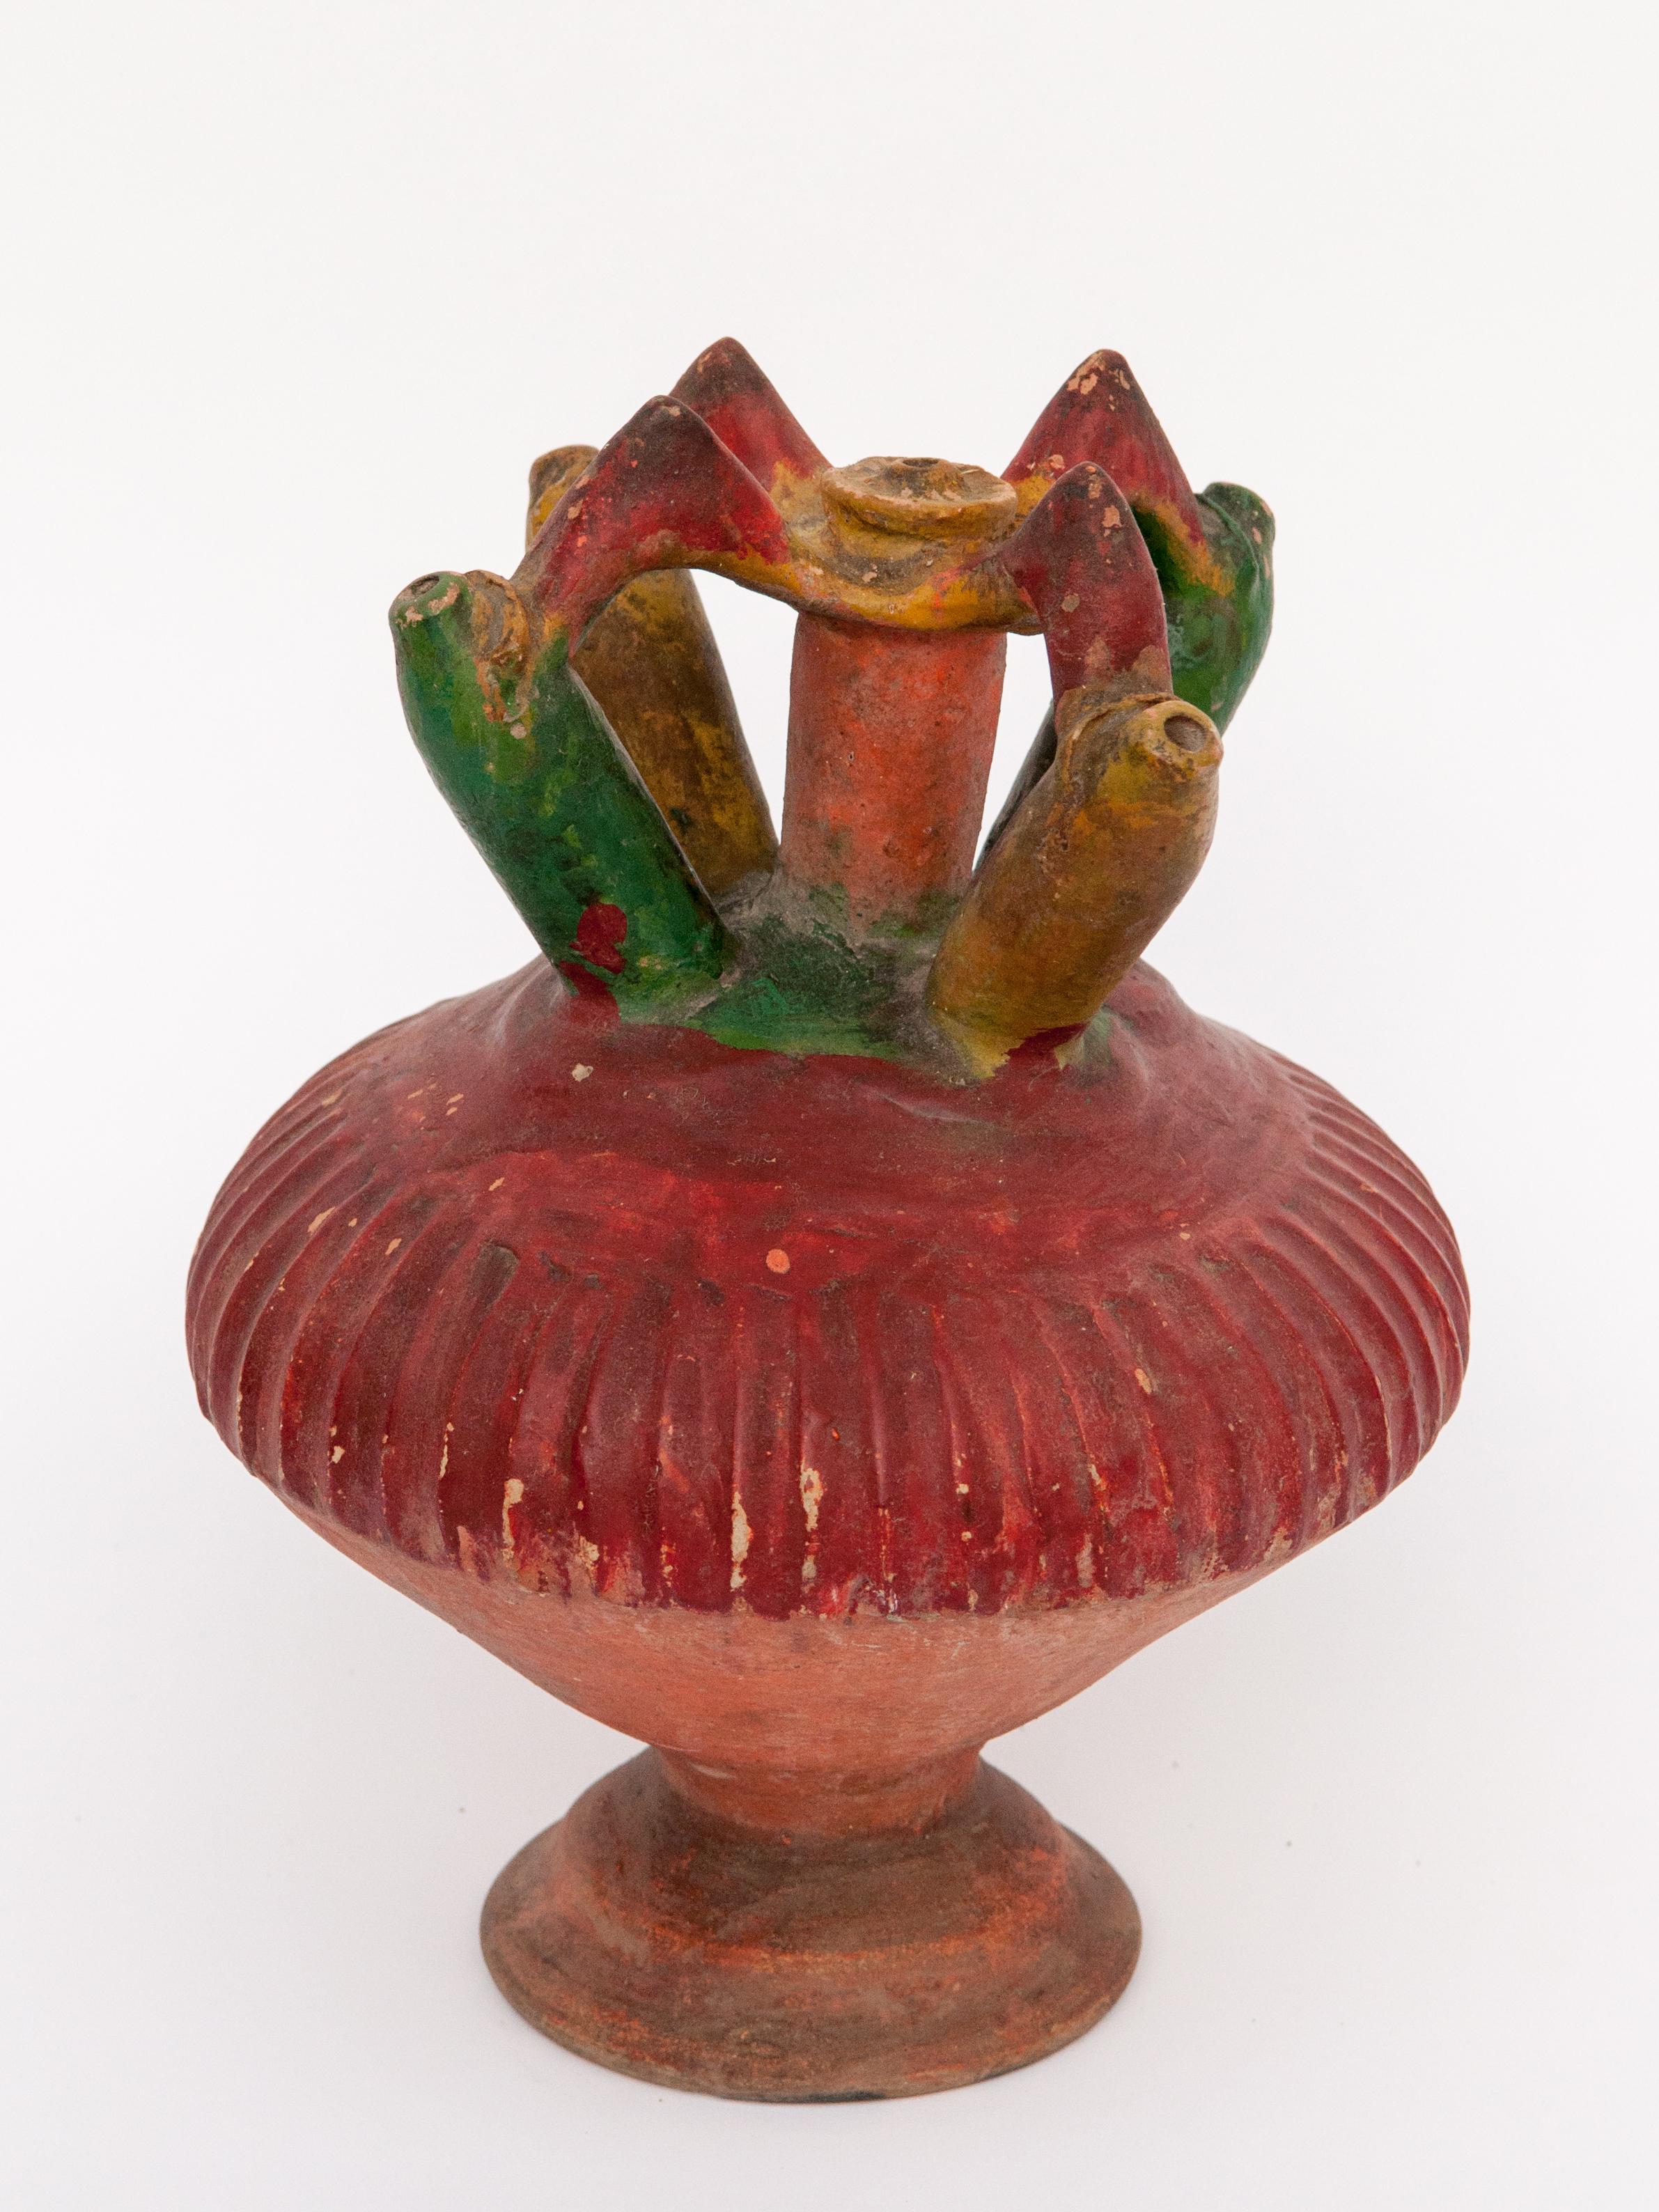 Kendi Earthenware Ritual Ceramic Vessel with Original Color, Sumatra. Early 20th Century.
Kendi are pouring and drinking vessels found throughout Southeast Asia since ancient times. This multi spouted example is from Palembang, Sumatra, and dates to